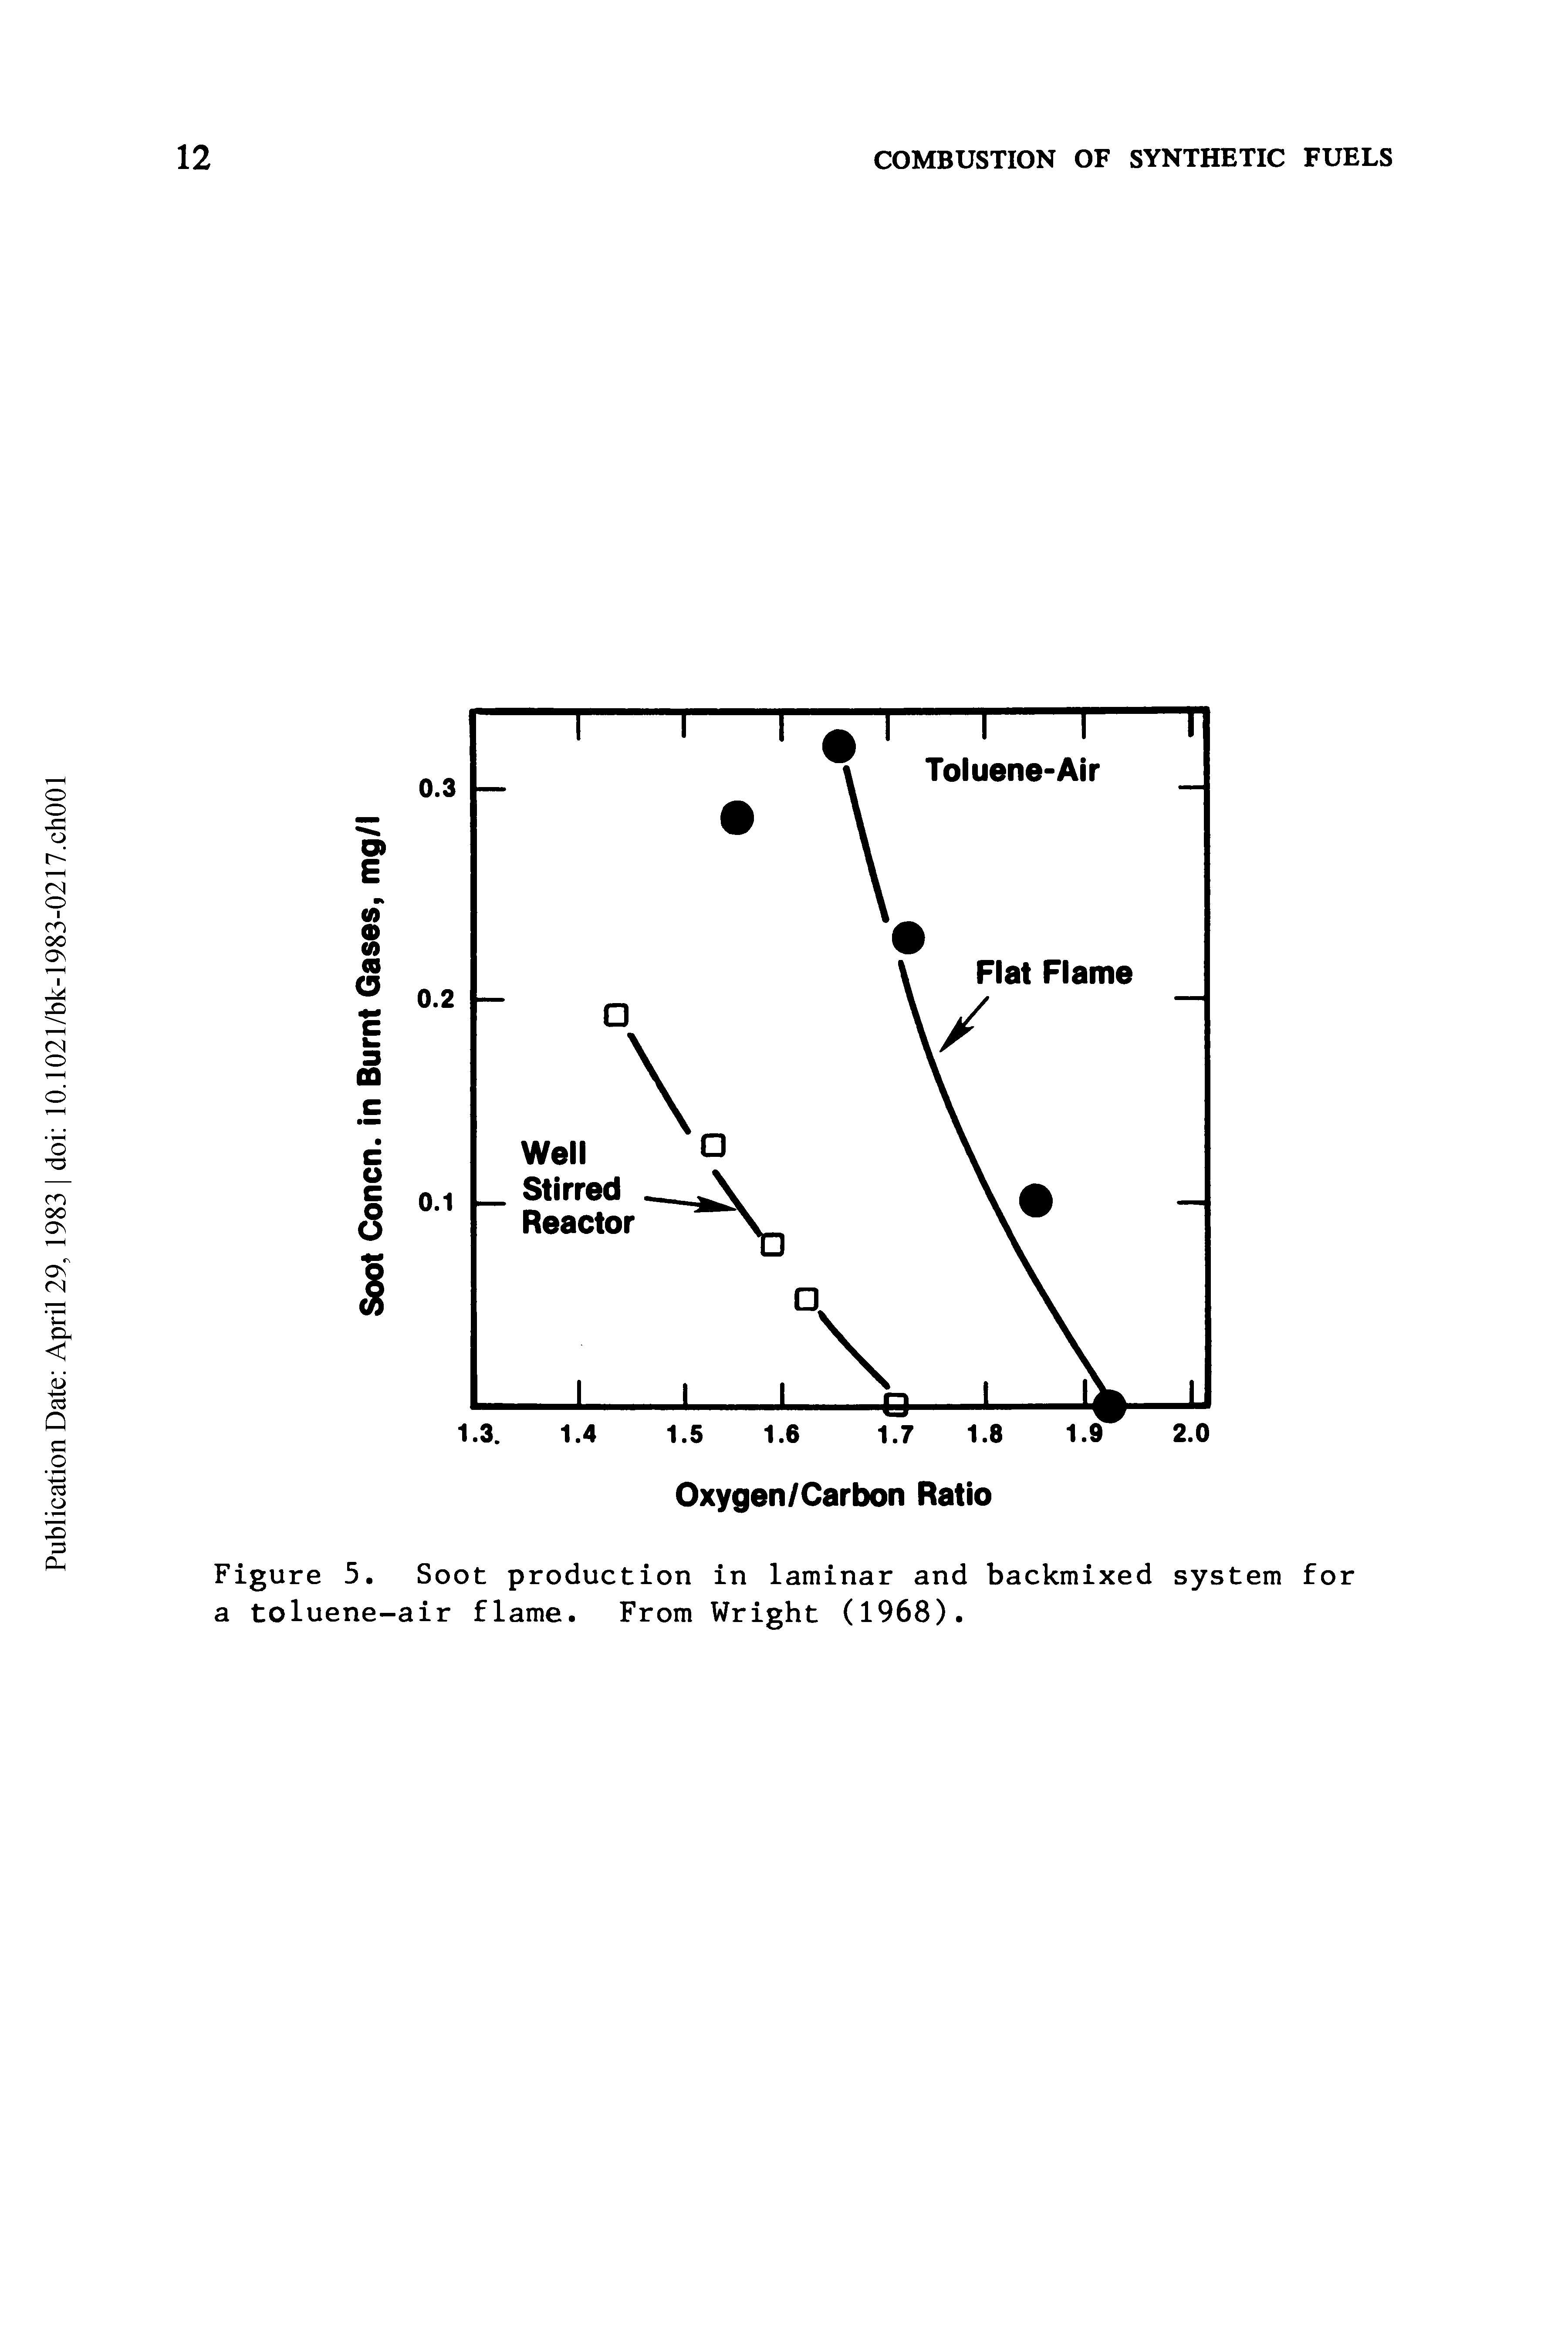 Figure 5. Soot production in laminar and backmixed system for a toluene-air flame. From Wright (1968).